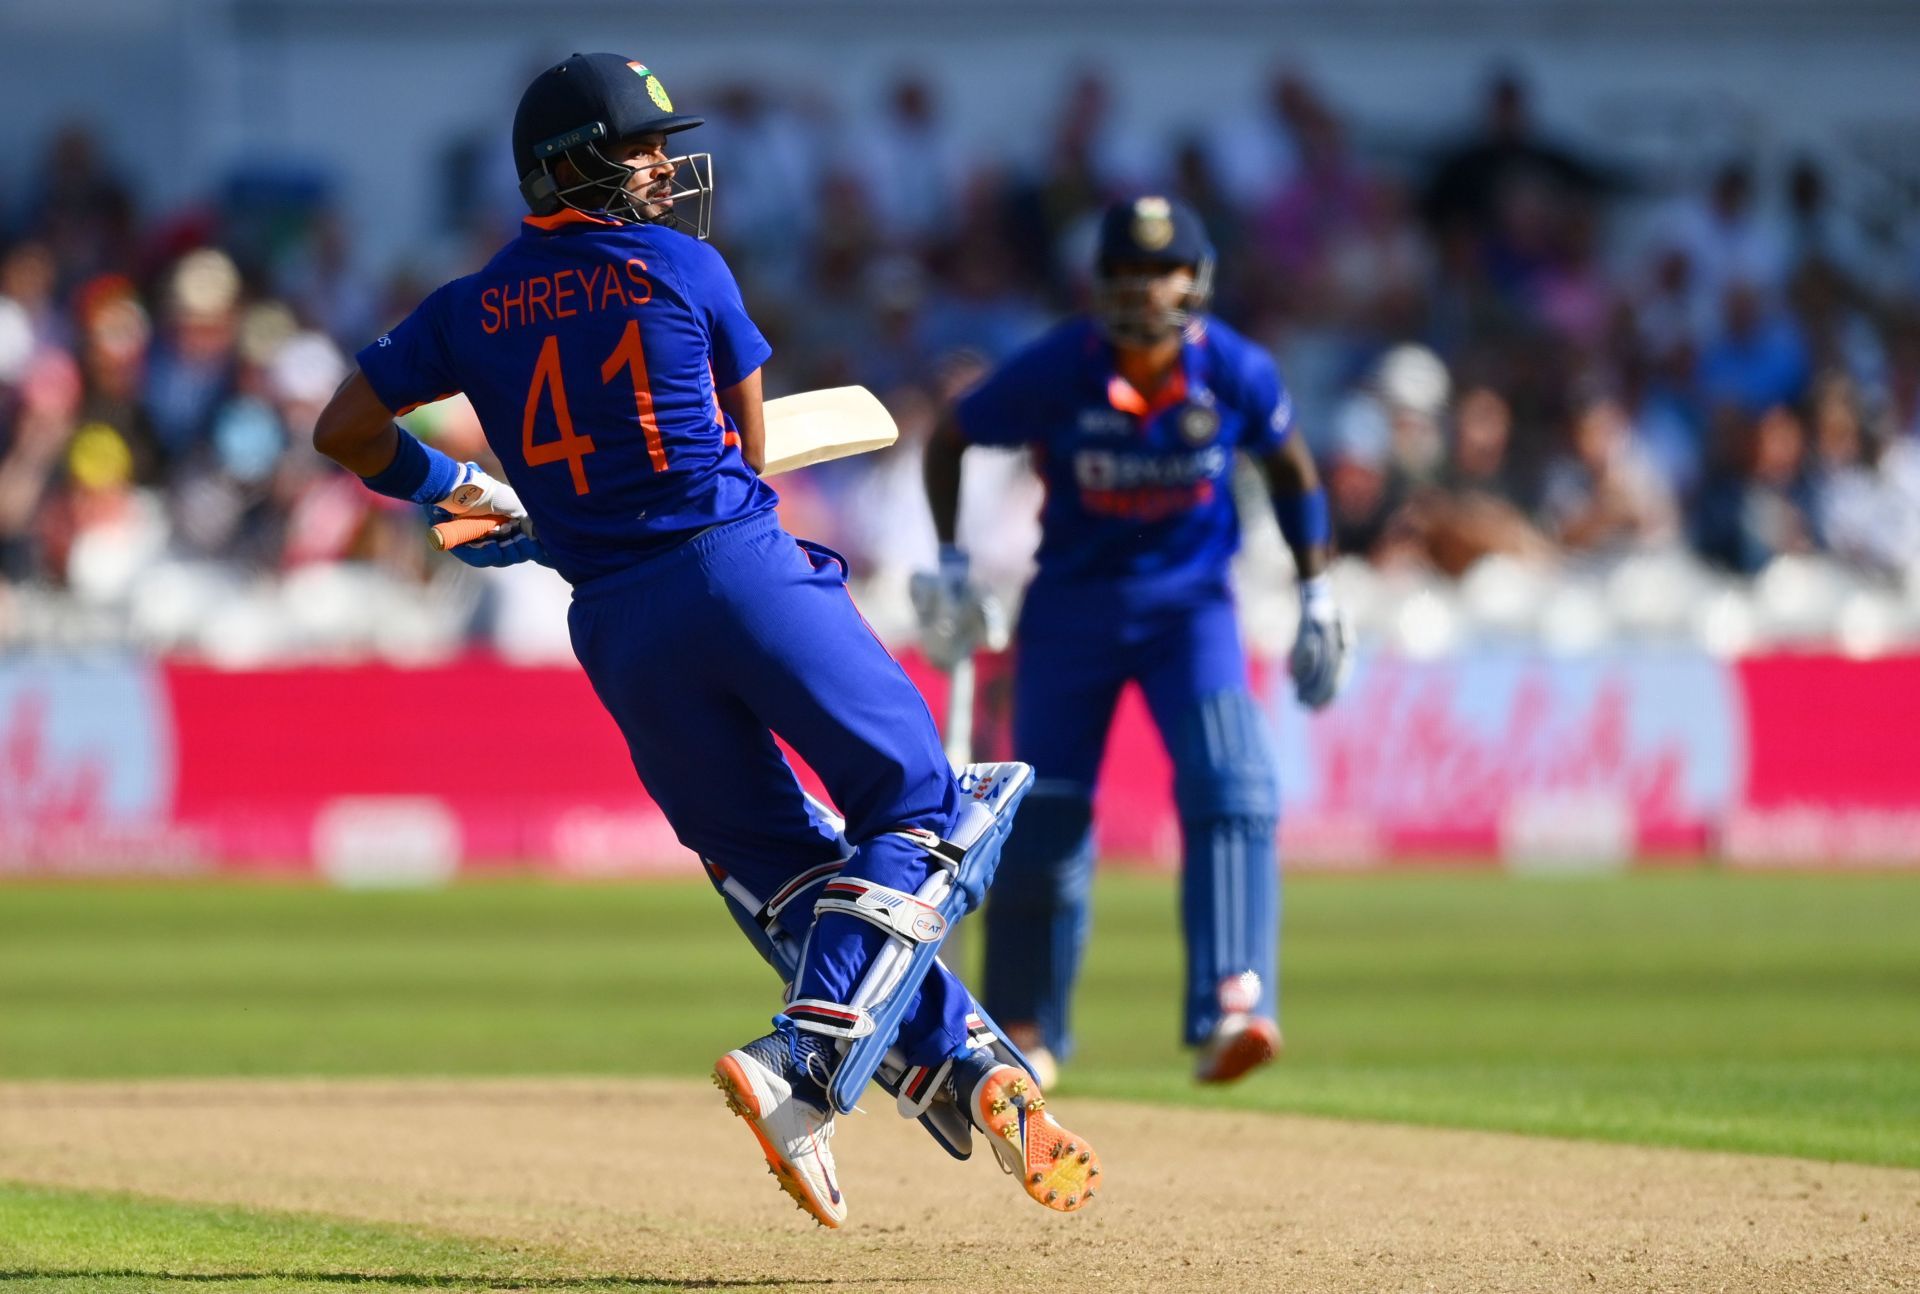 Shreyas Iyer has been woeful against the short ball. Pic: Getty Images